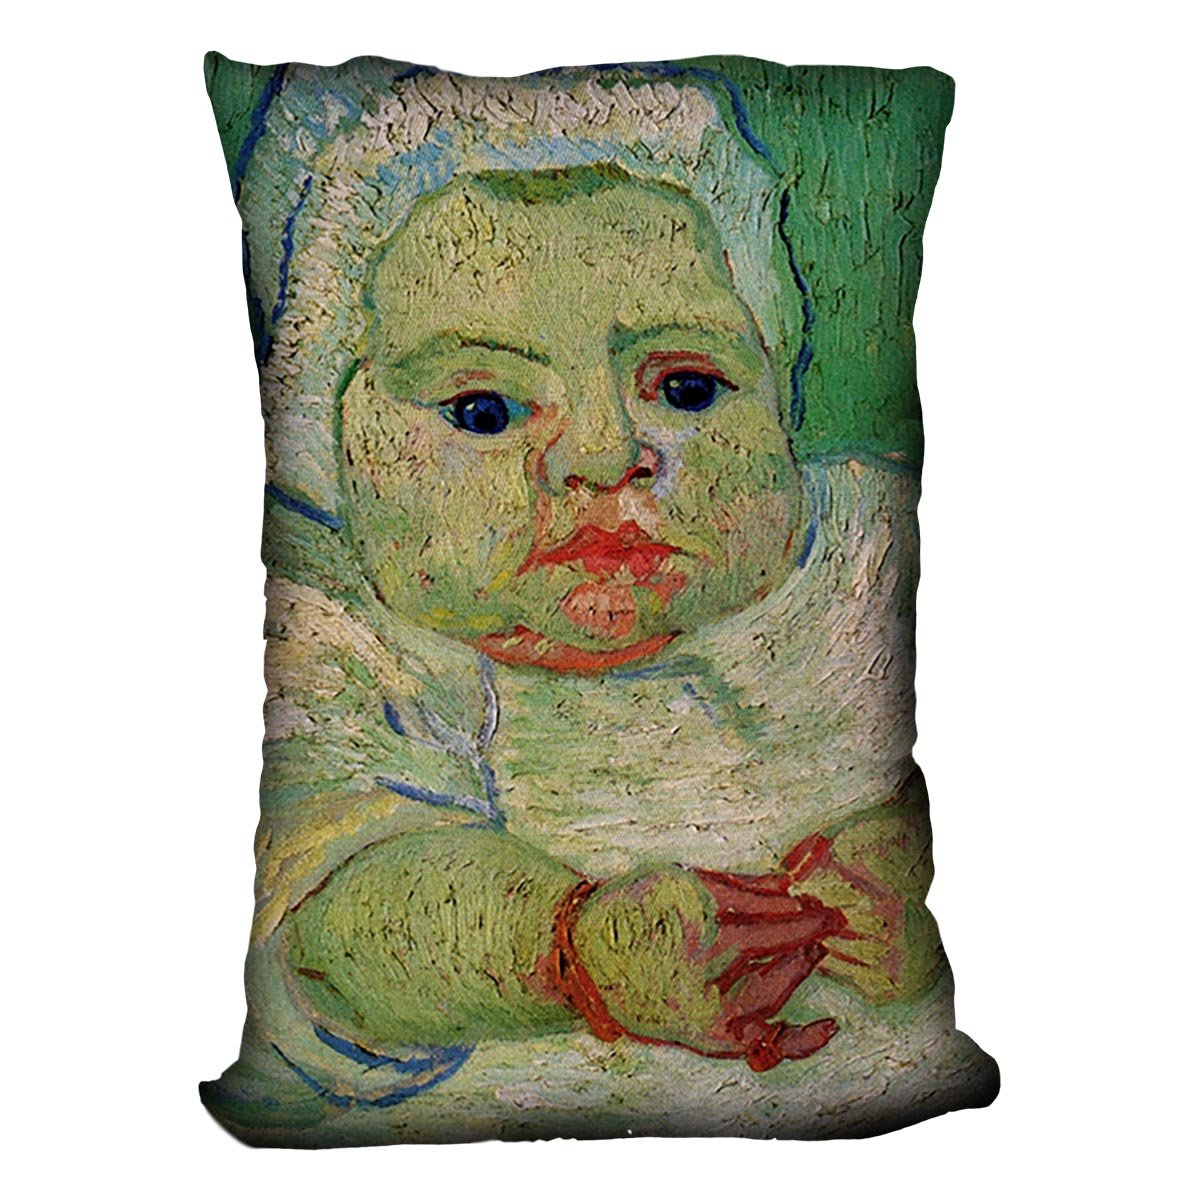 The Baby Marcelle Roulin by Van Gogh Throw Pillow